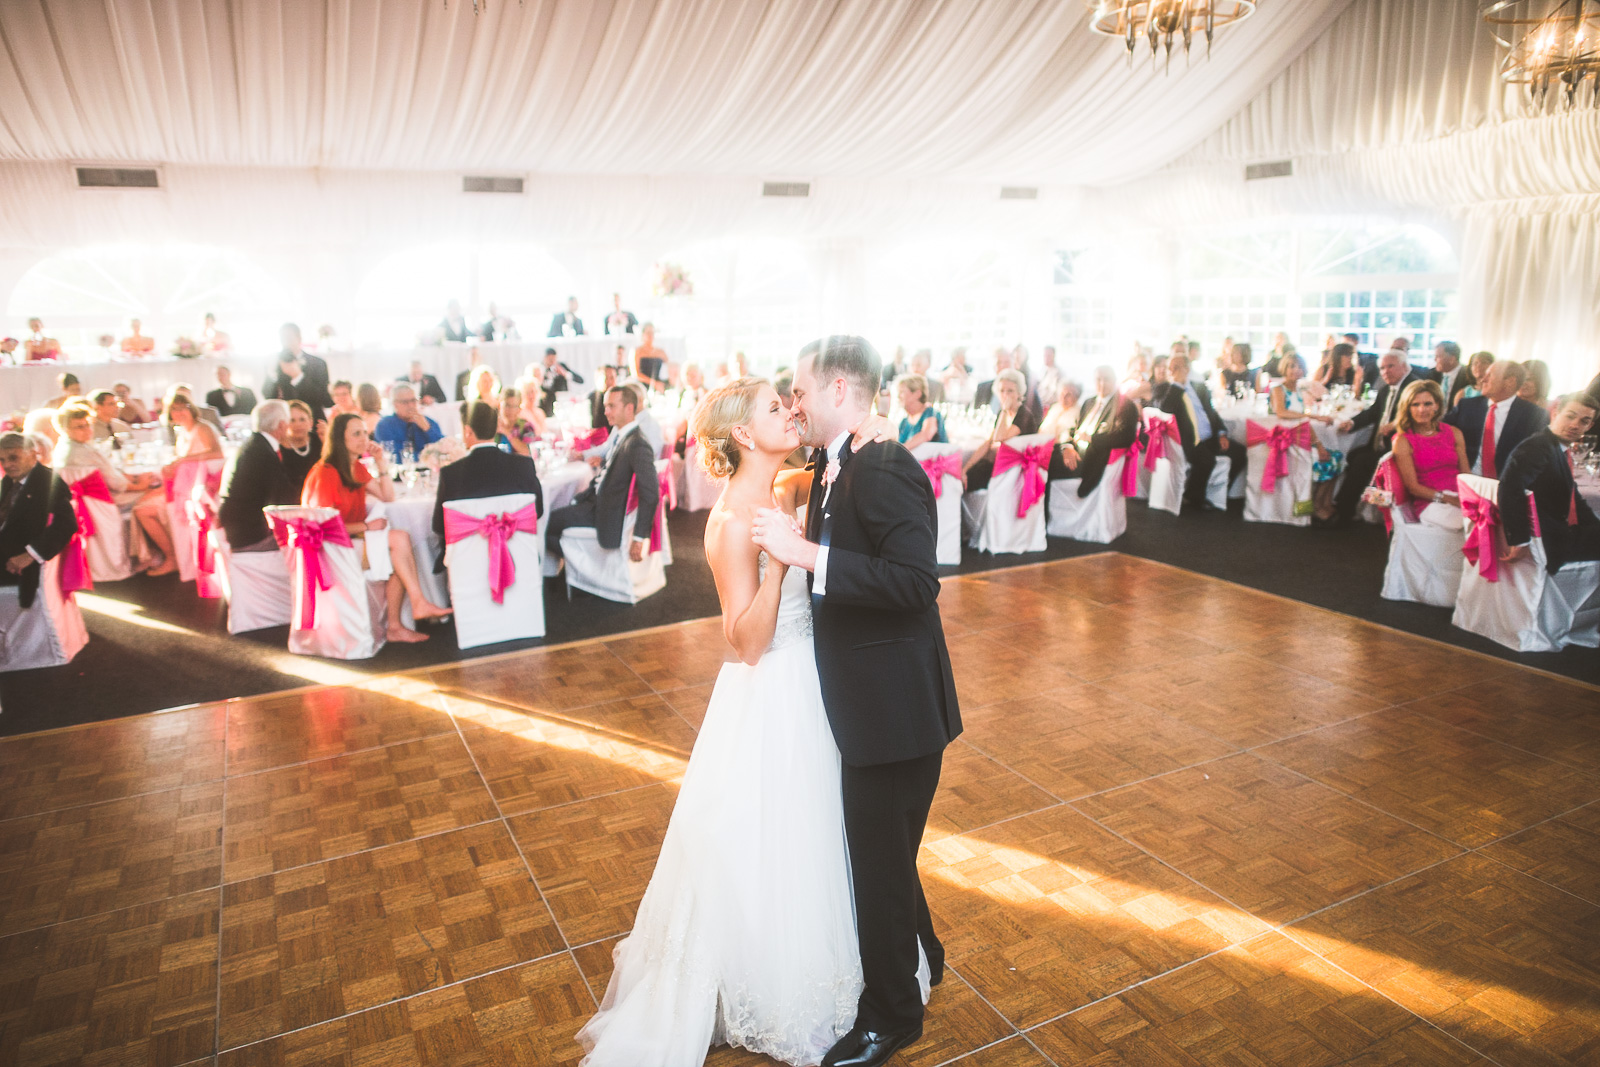 65 first dance at reception - Kristina + Dave // Wedding Photographer in Chicago